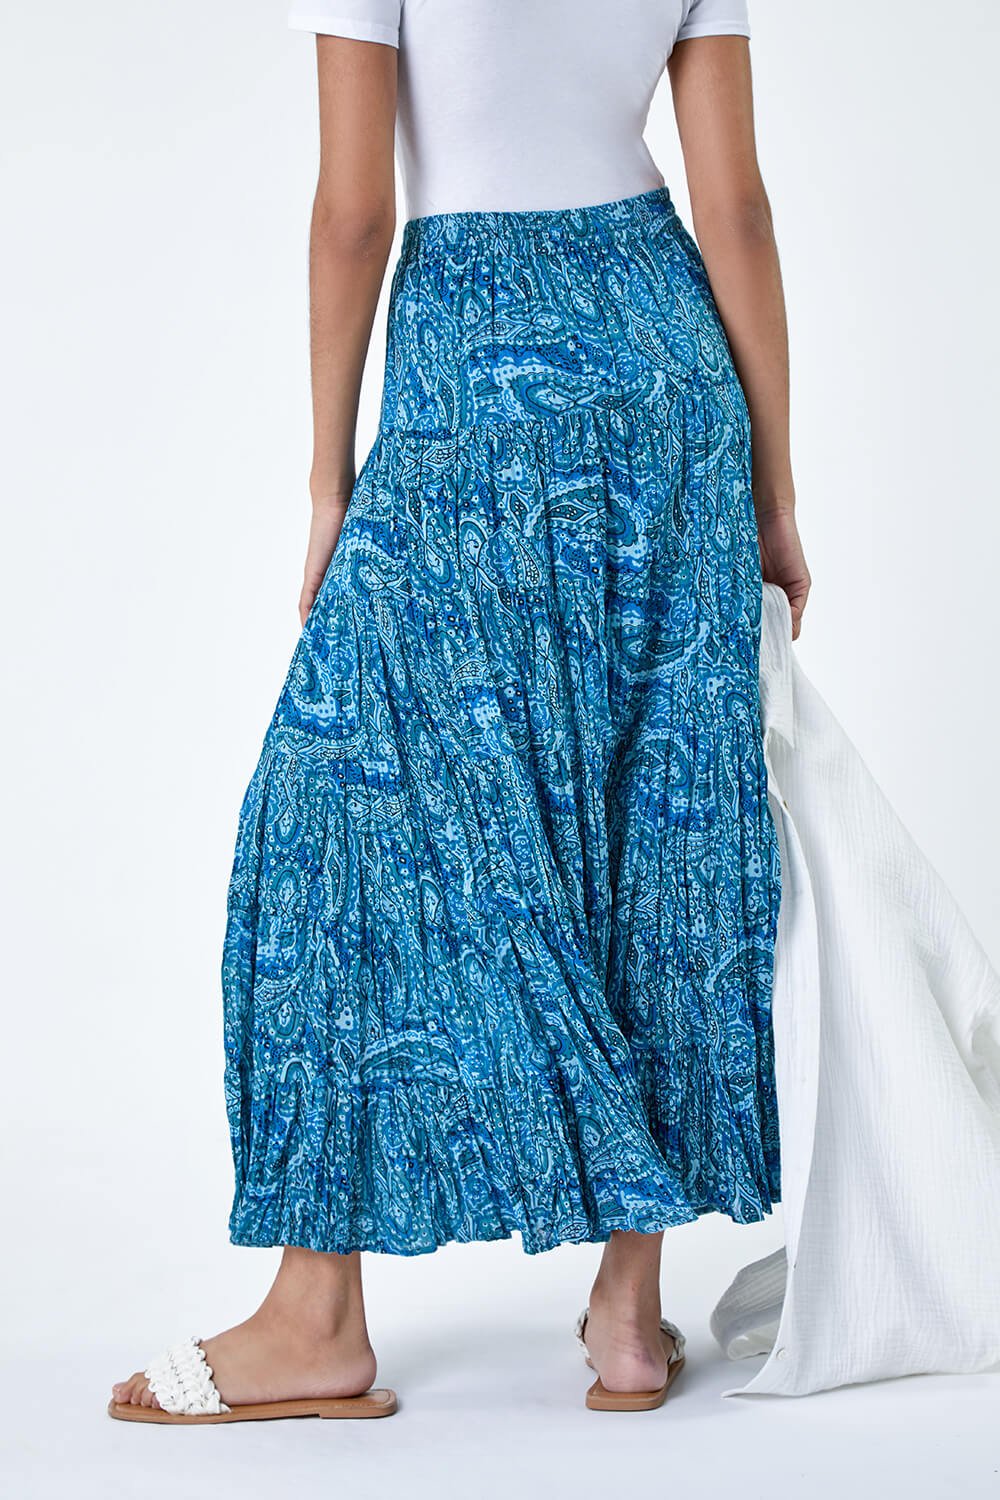 Blue Paisley Crinkle Cotton Tiered Maxi Skirt, Image 3 of 5